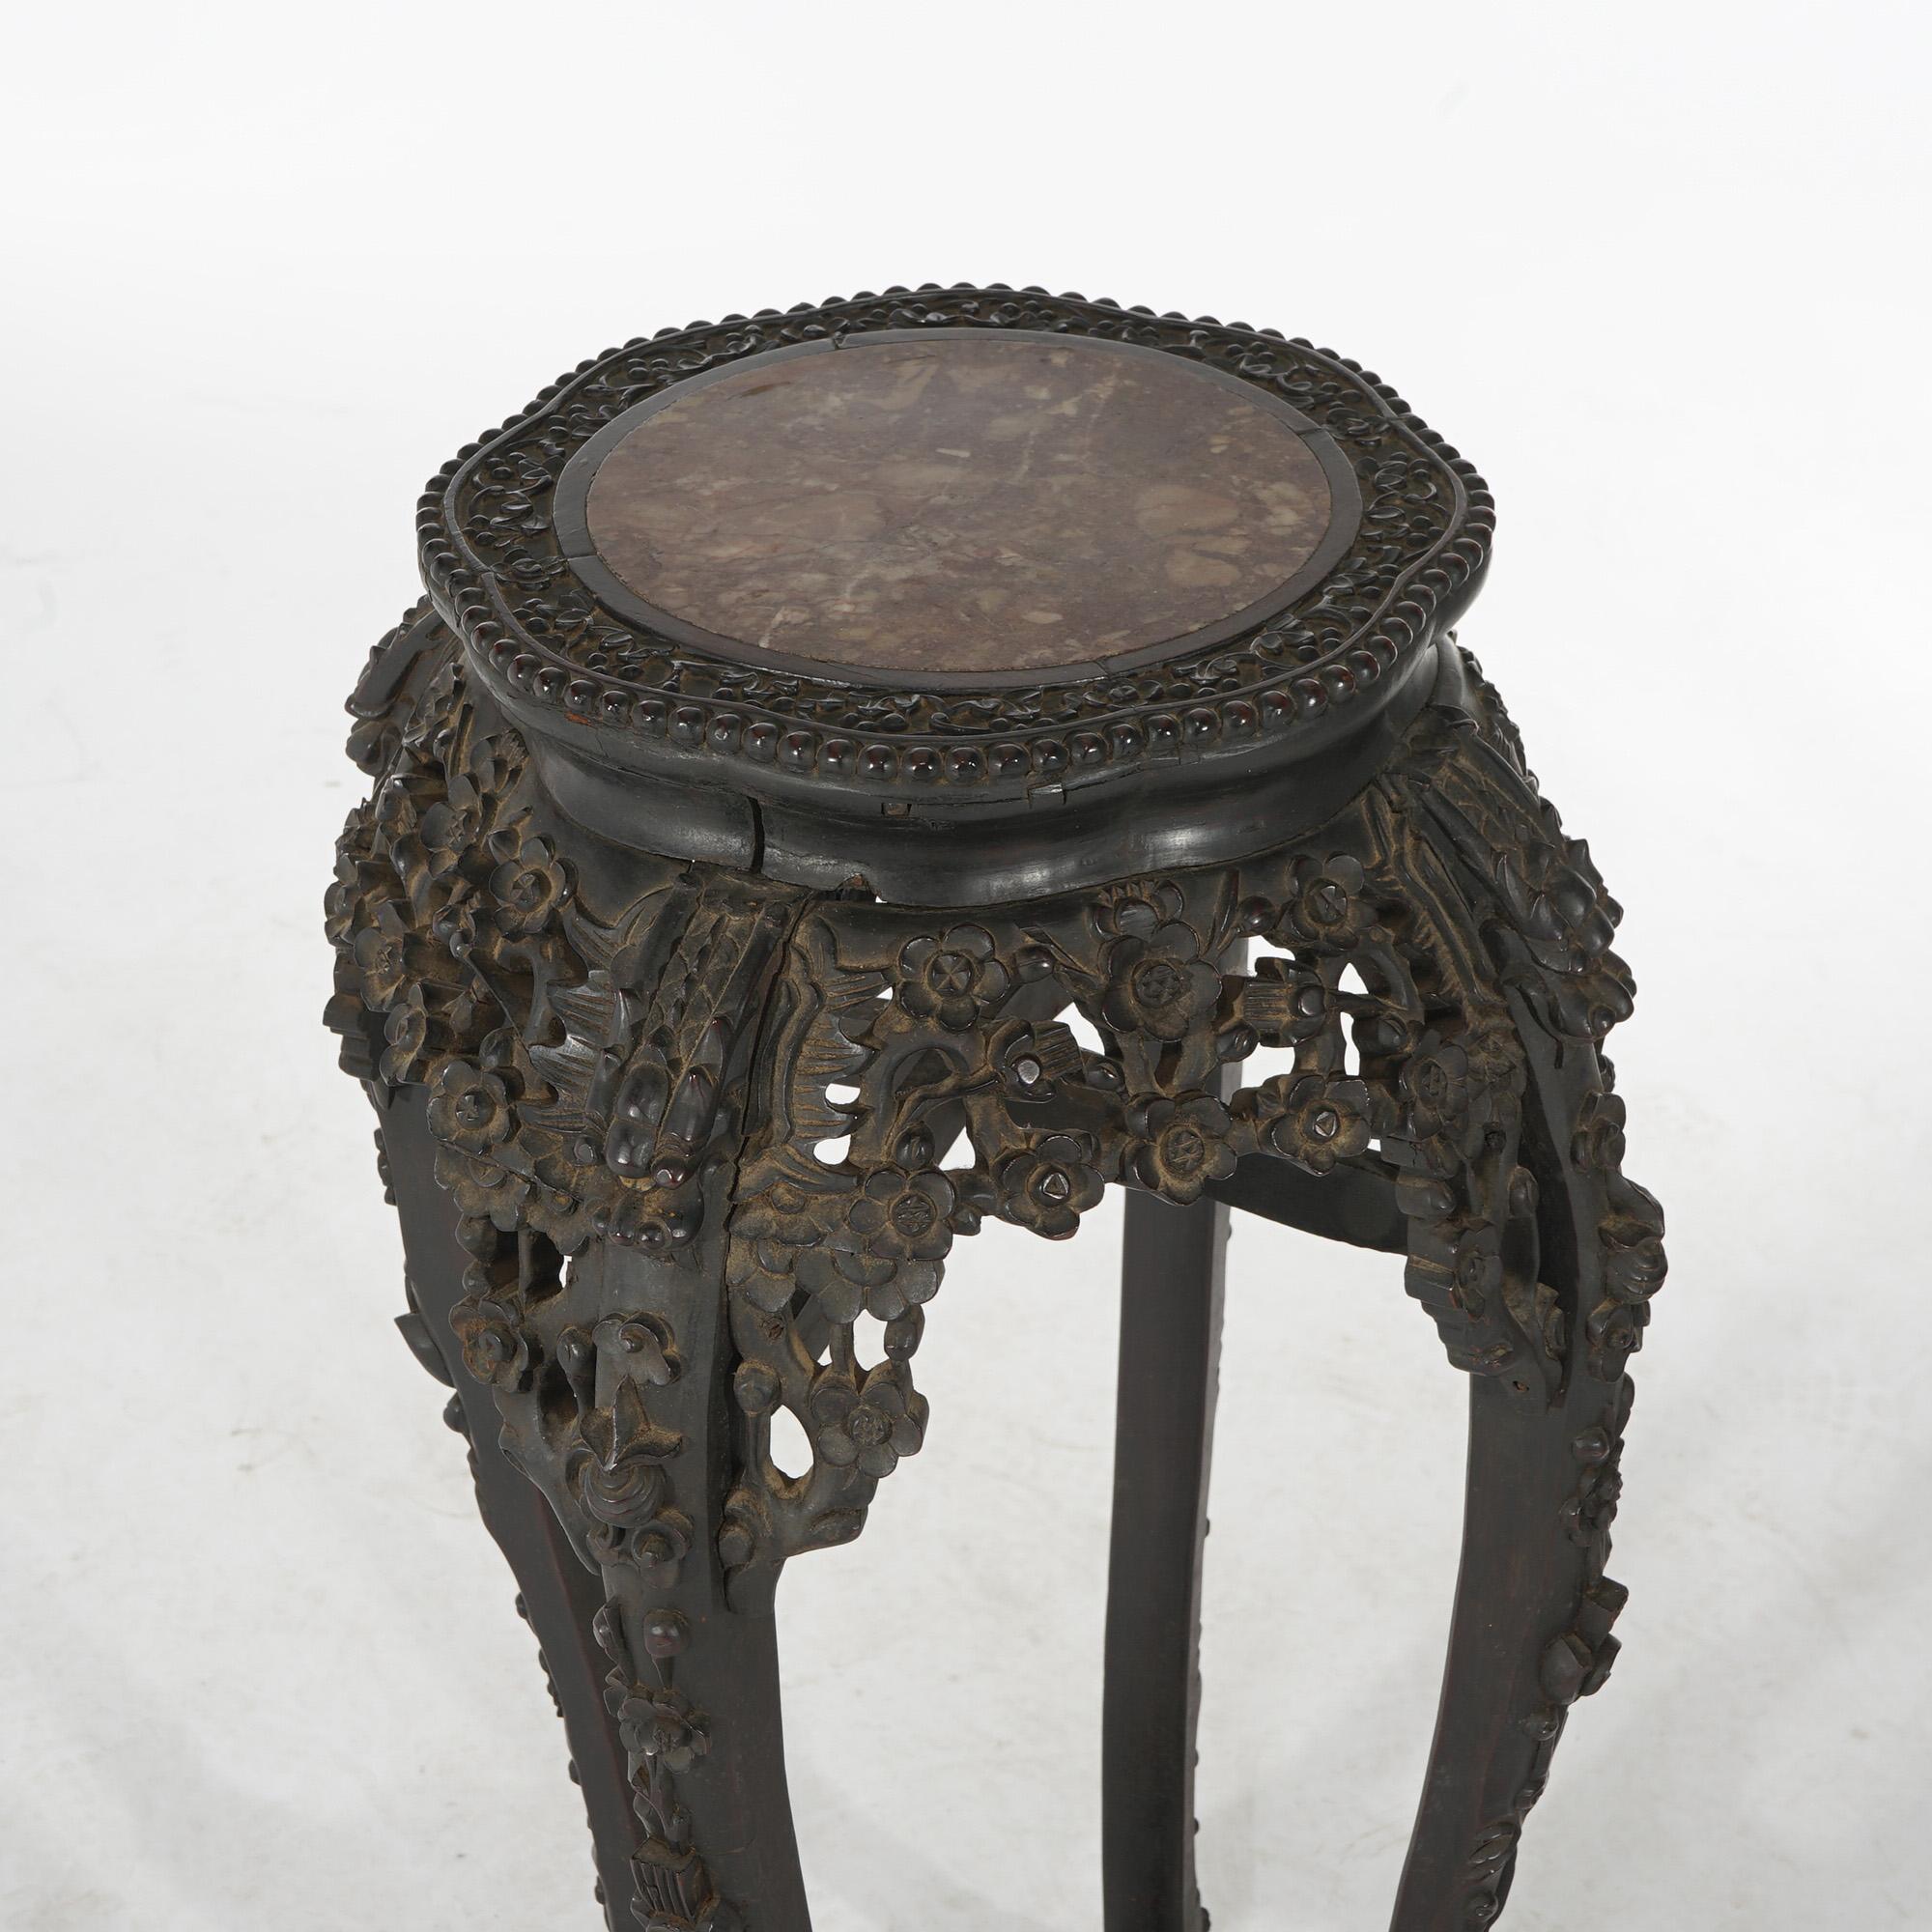 Antique Chinese Tall Foliate Carved Rosewood Table with Inset Rouge Marble Top, Bead Trimming and Cabriole Legs with Stylized Paw Feet, C1910

Measures- 35.75''H x 19''W x 19''D